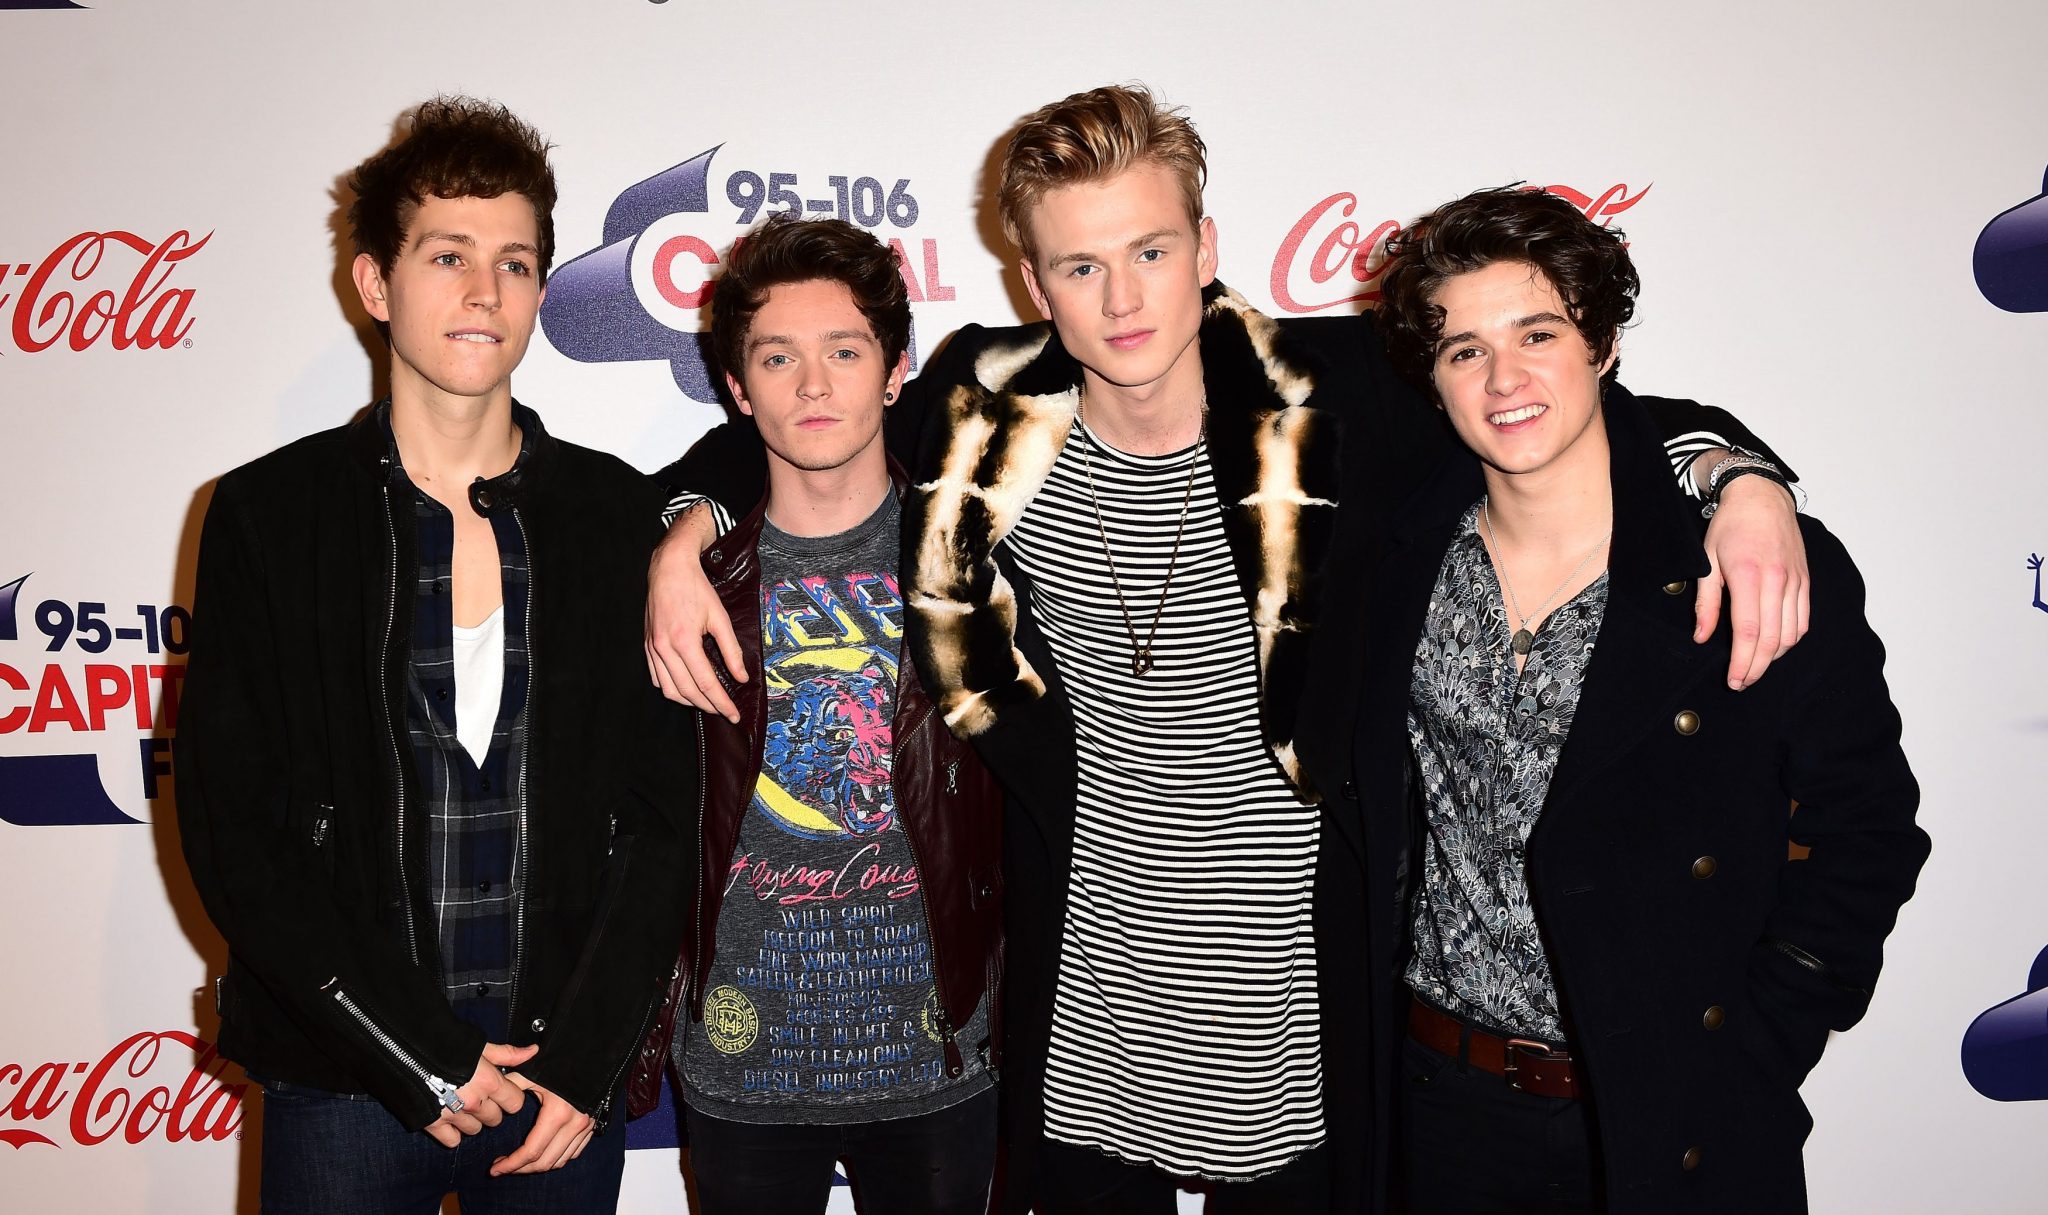 (left to right) James McVey, Connor Ball, Tristan Evans and Brad Simpson from The Vamps attends the Capital FM Jingle Bell Ball 2015 at the O2 Arena, London.